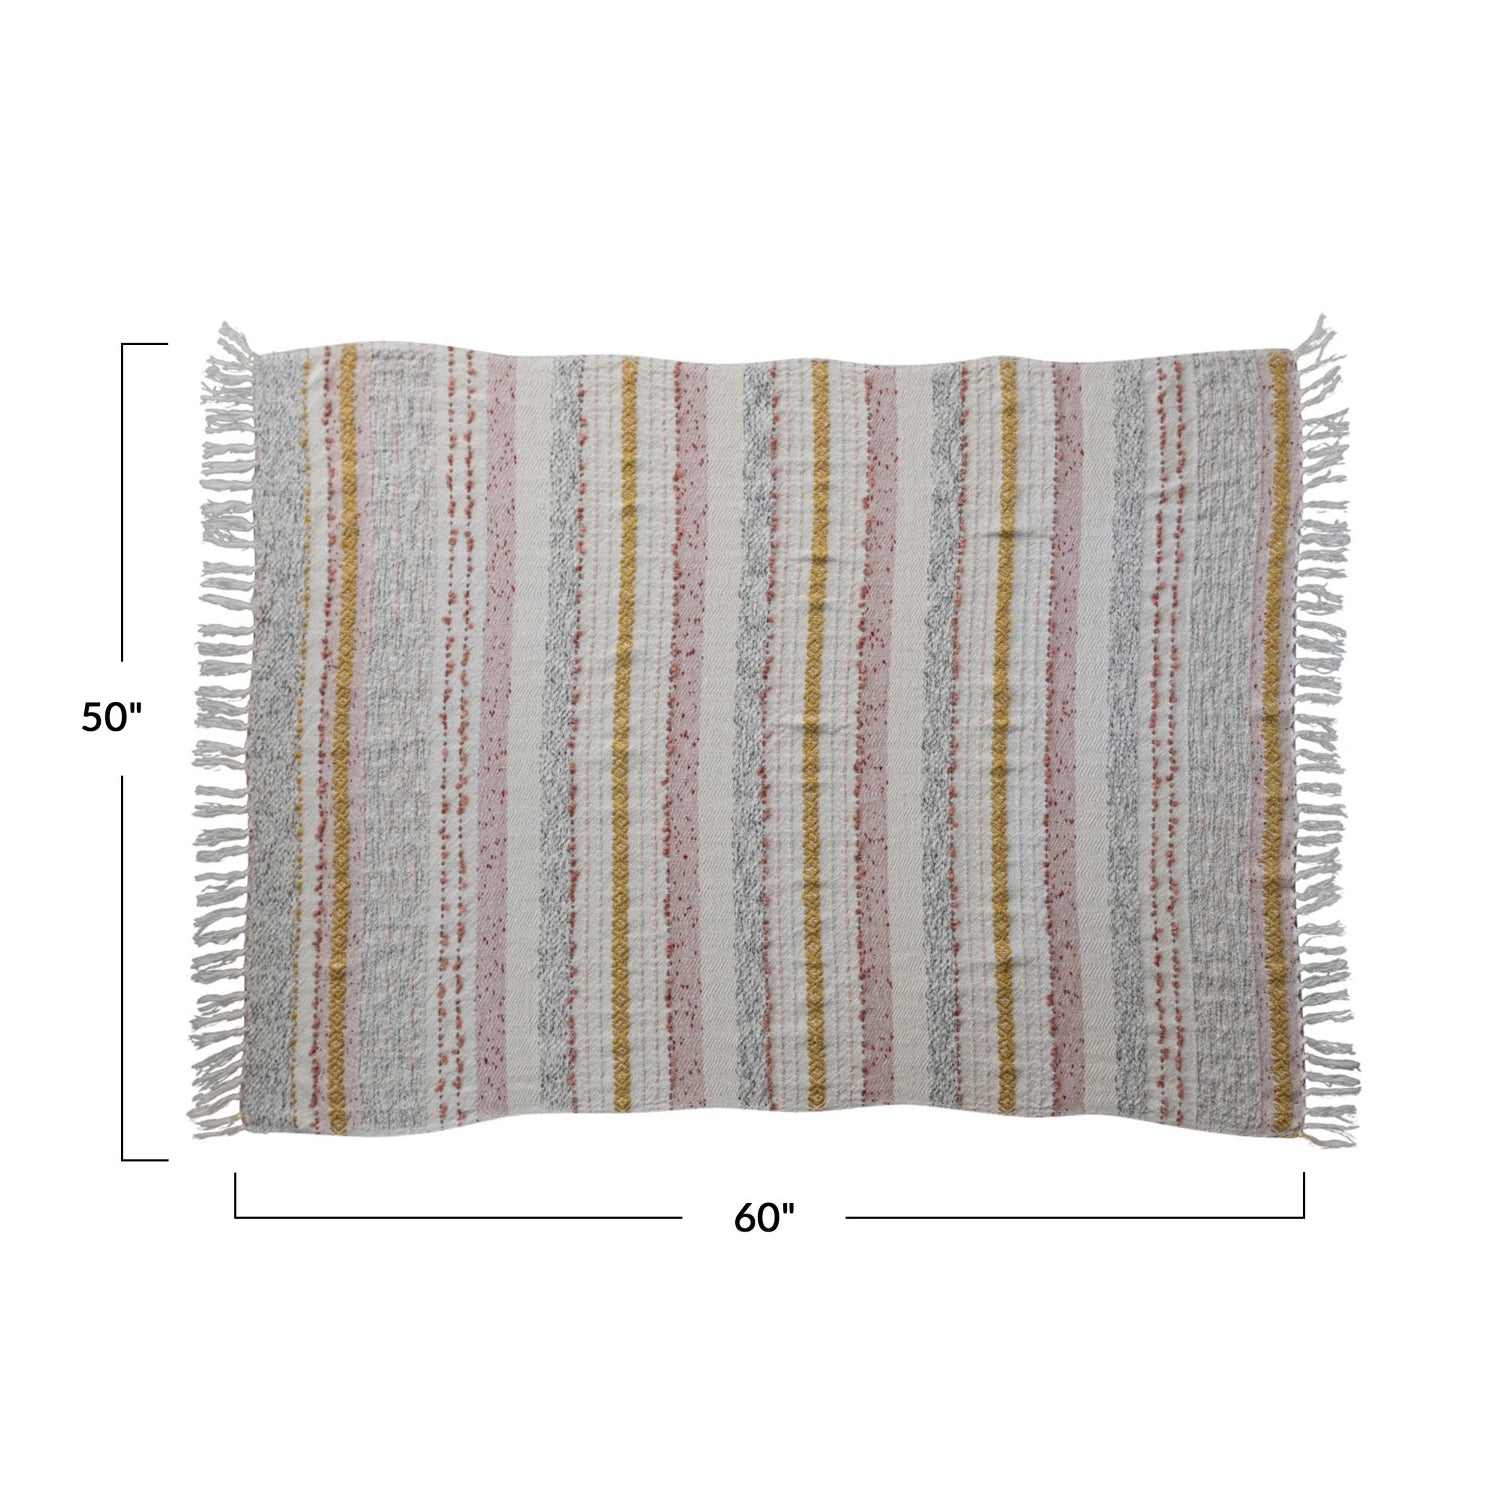 Measurements of the Woven cotton blend throw blanket with stripes, embroidery and fringe.